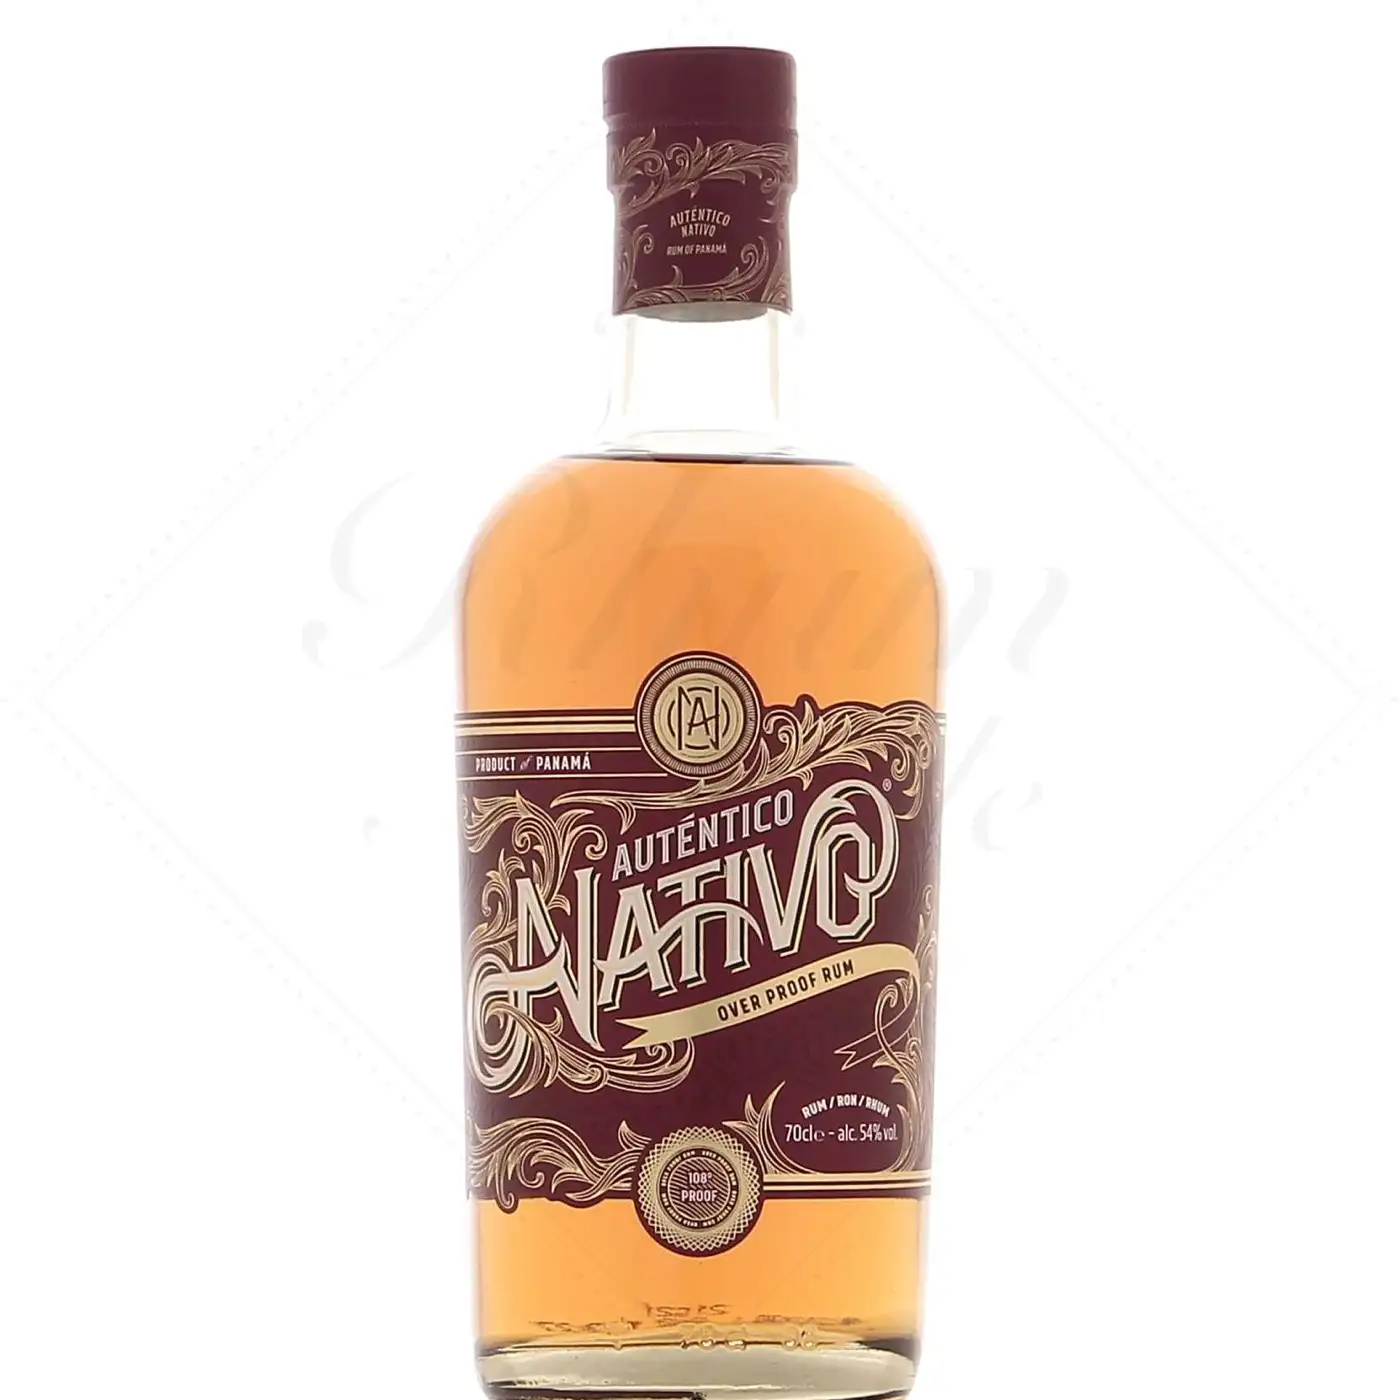 Image of the front of the bottle of the rum Auténtico Nativo Overproof